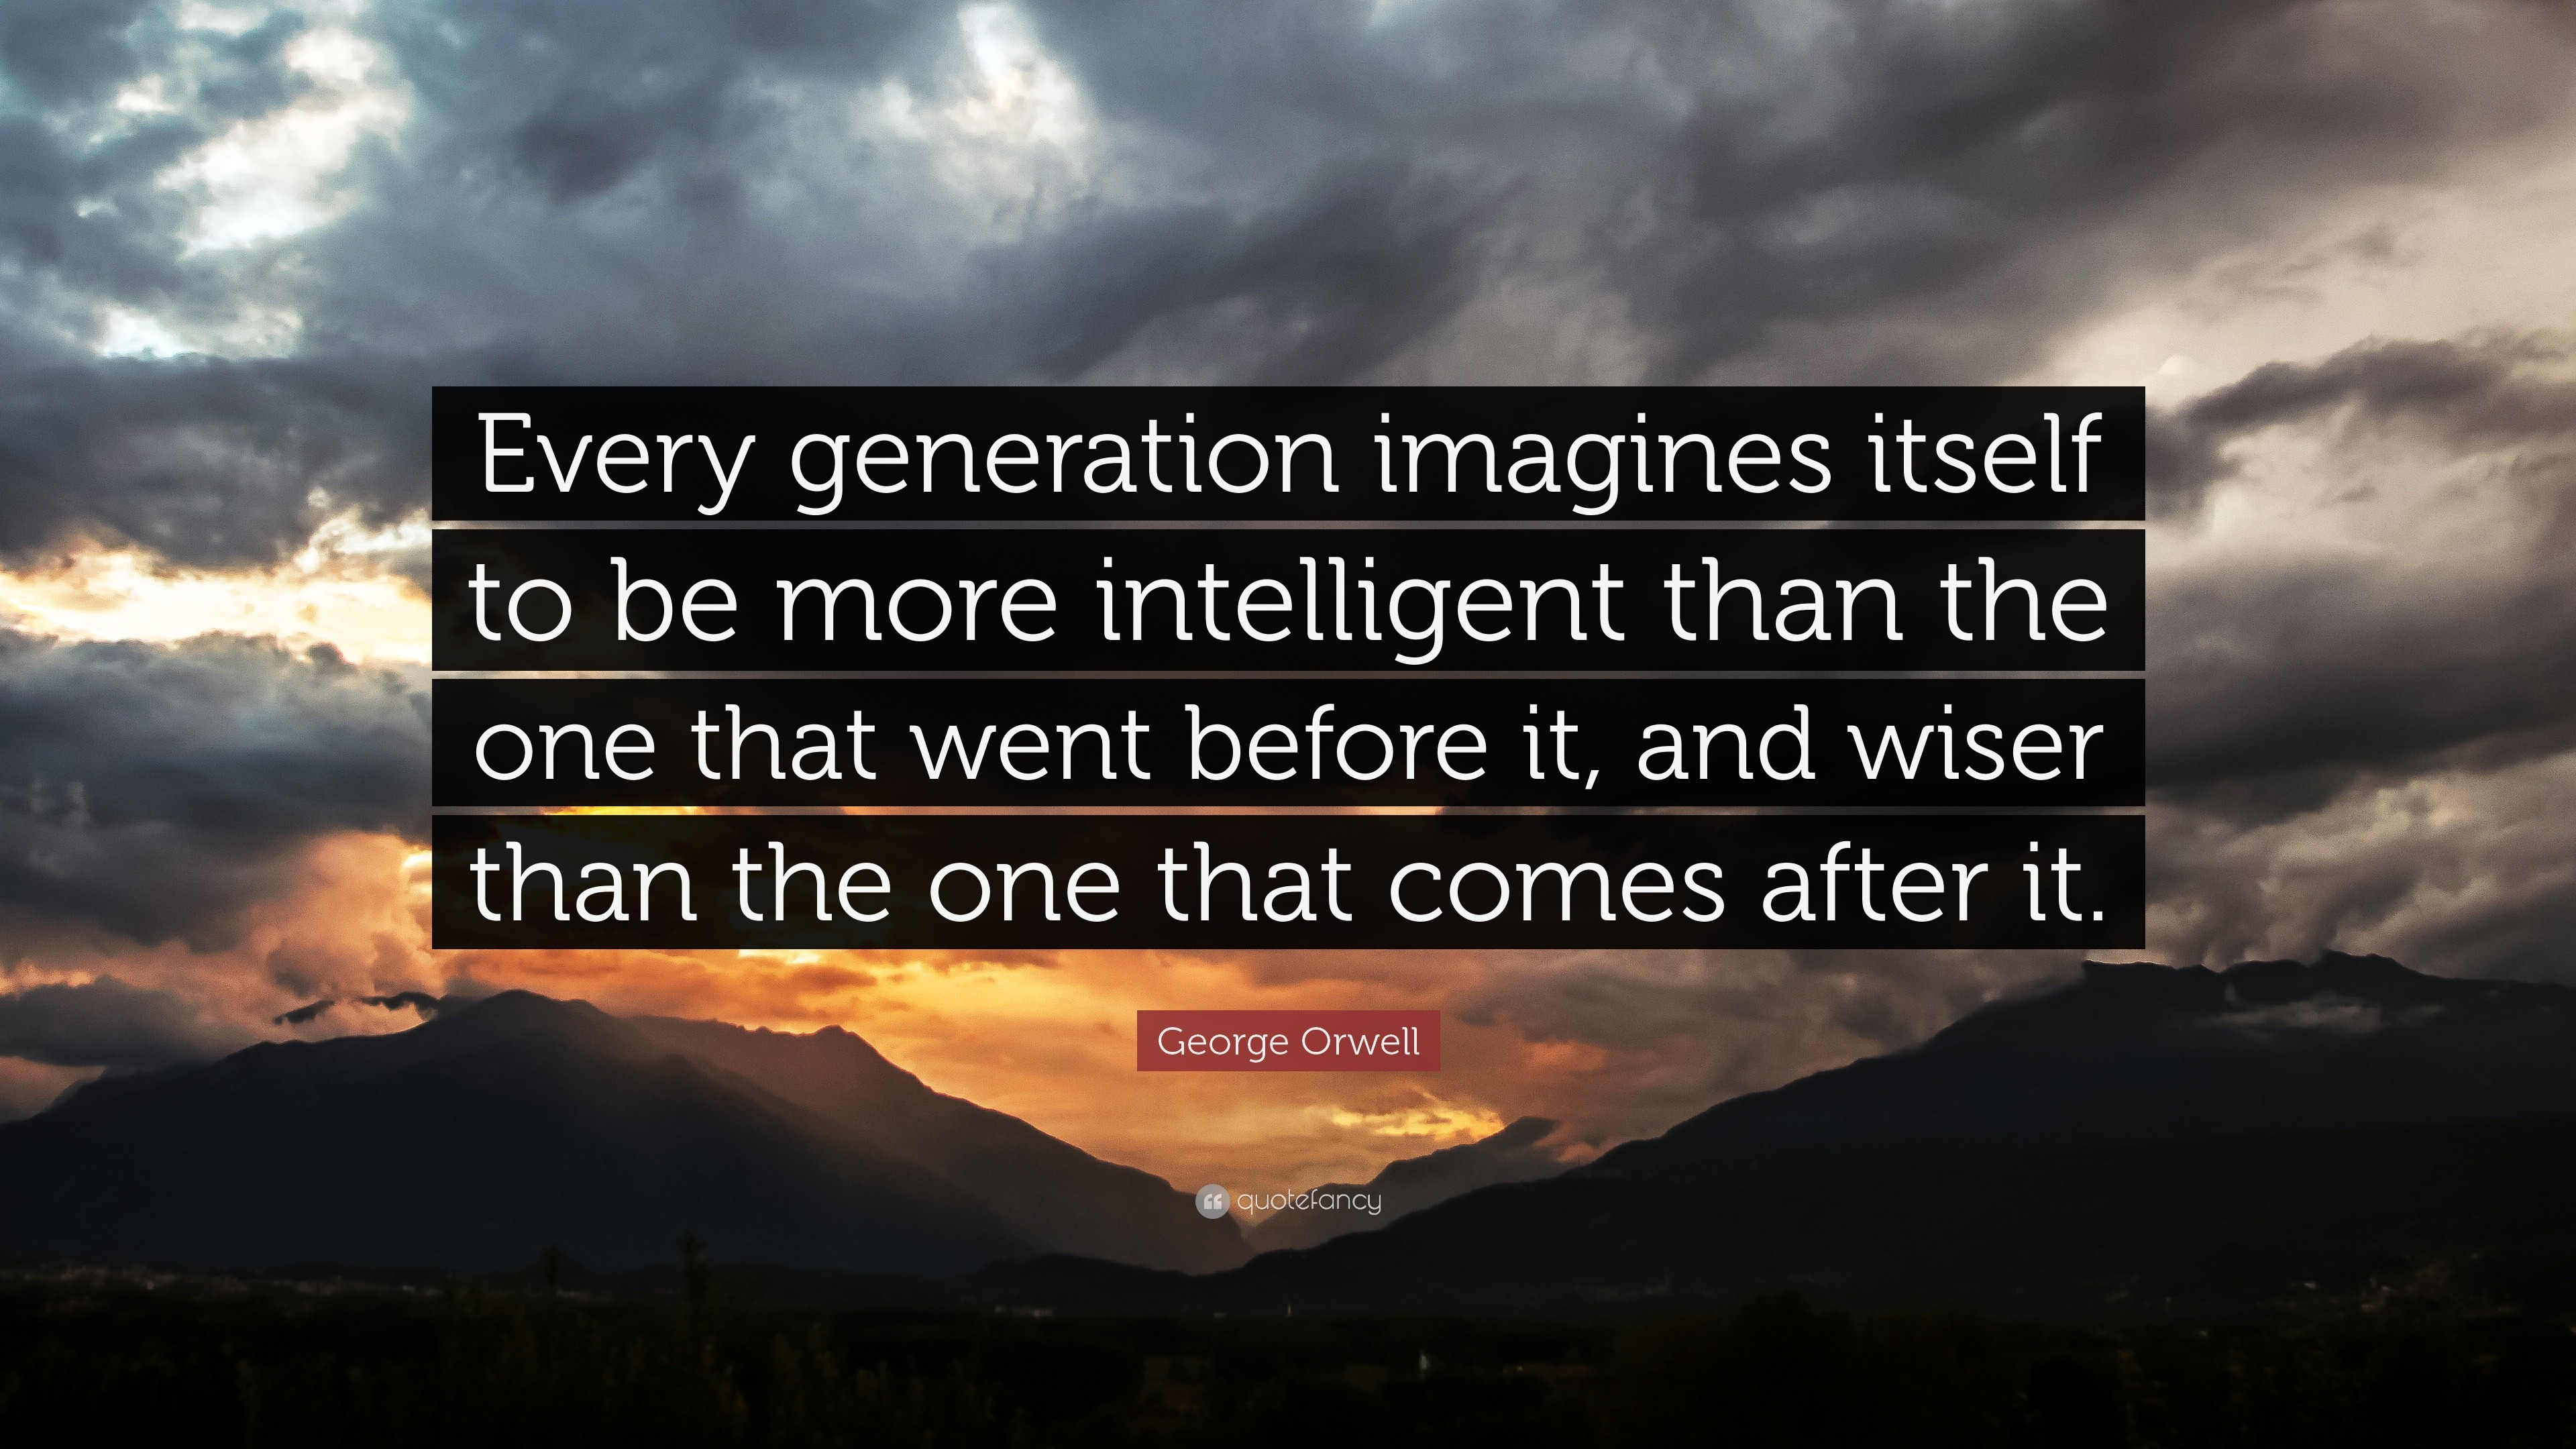 george orwell quote: "every generation imagines itself to be